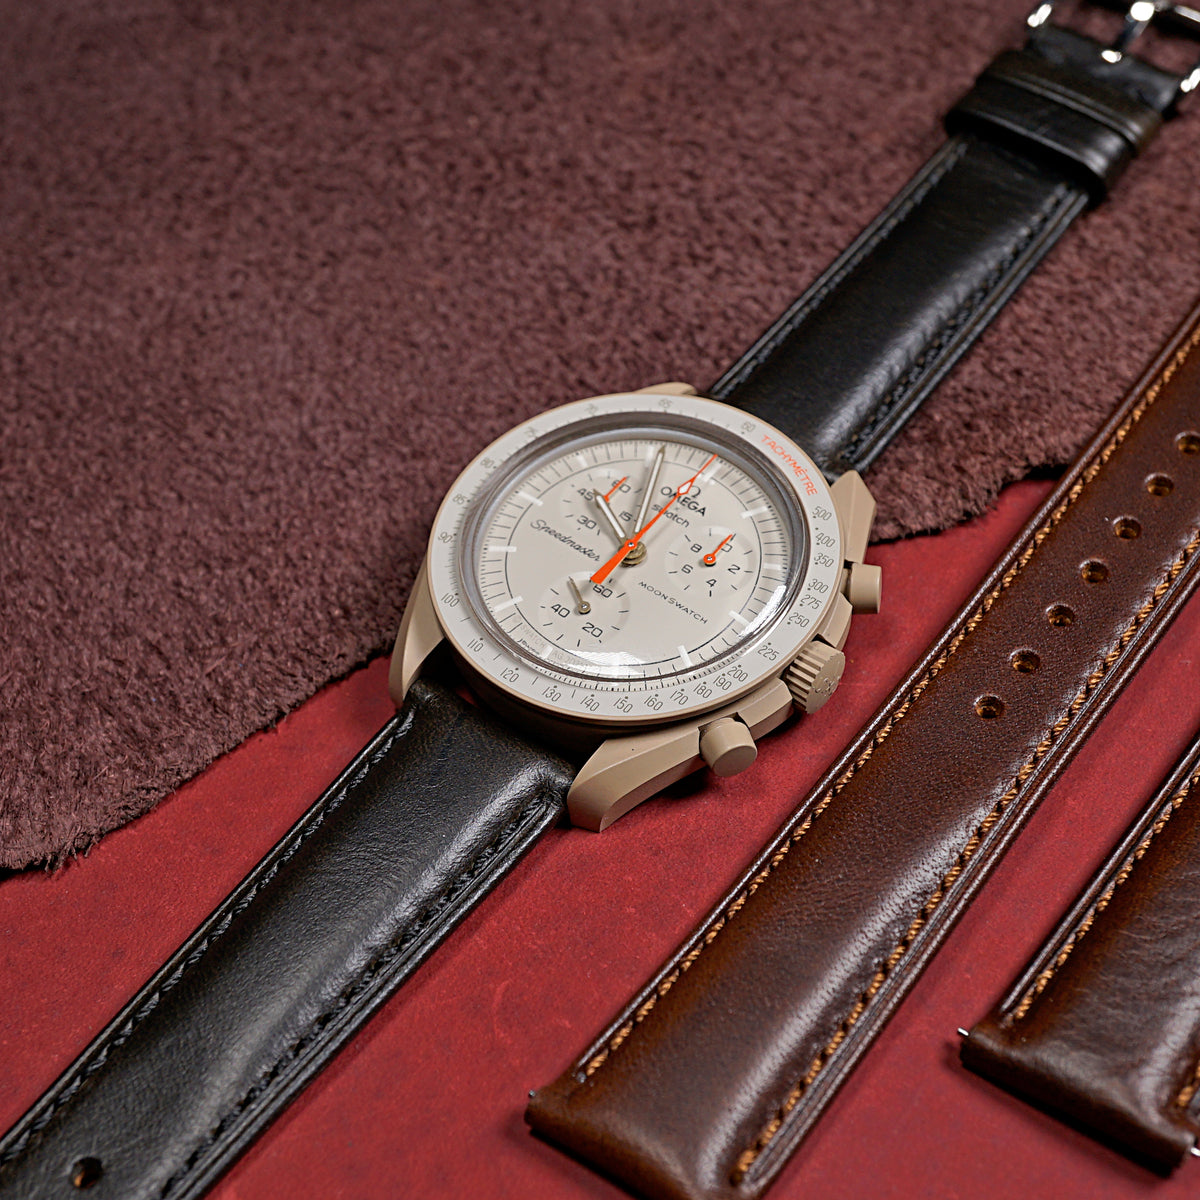 M3 Smooth Leather Watch Strap in Black